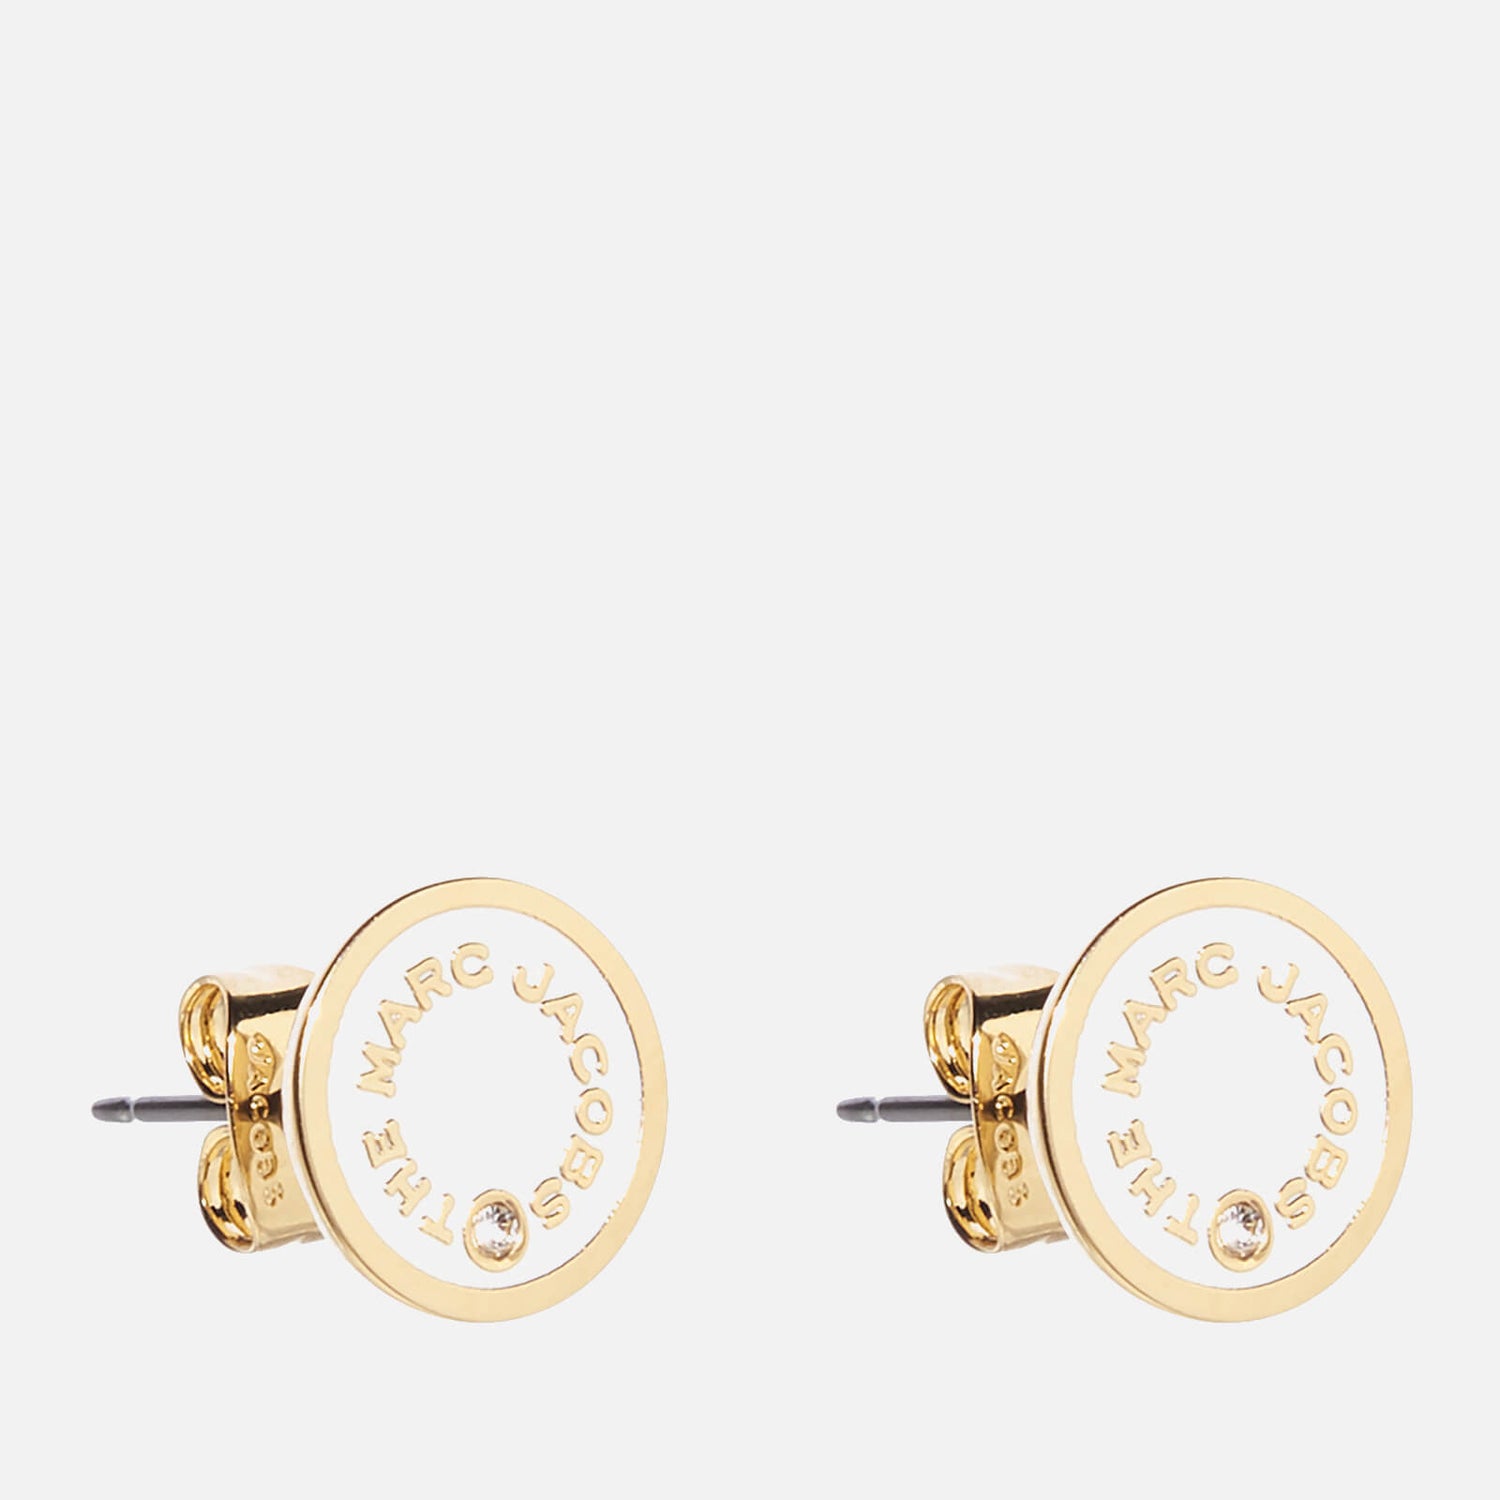 Marc Jacobs The Medallion Gold-Tone, Resin and Crystal Stud Earrings